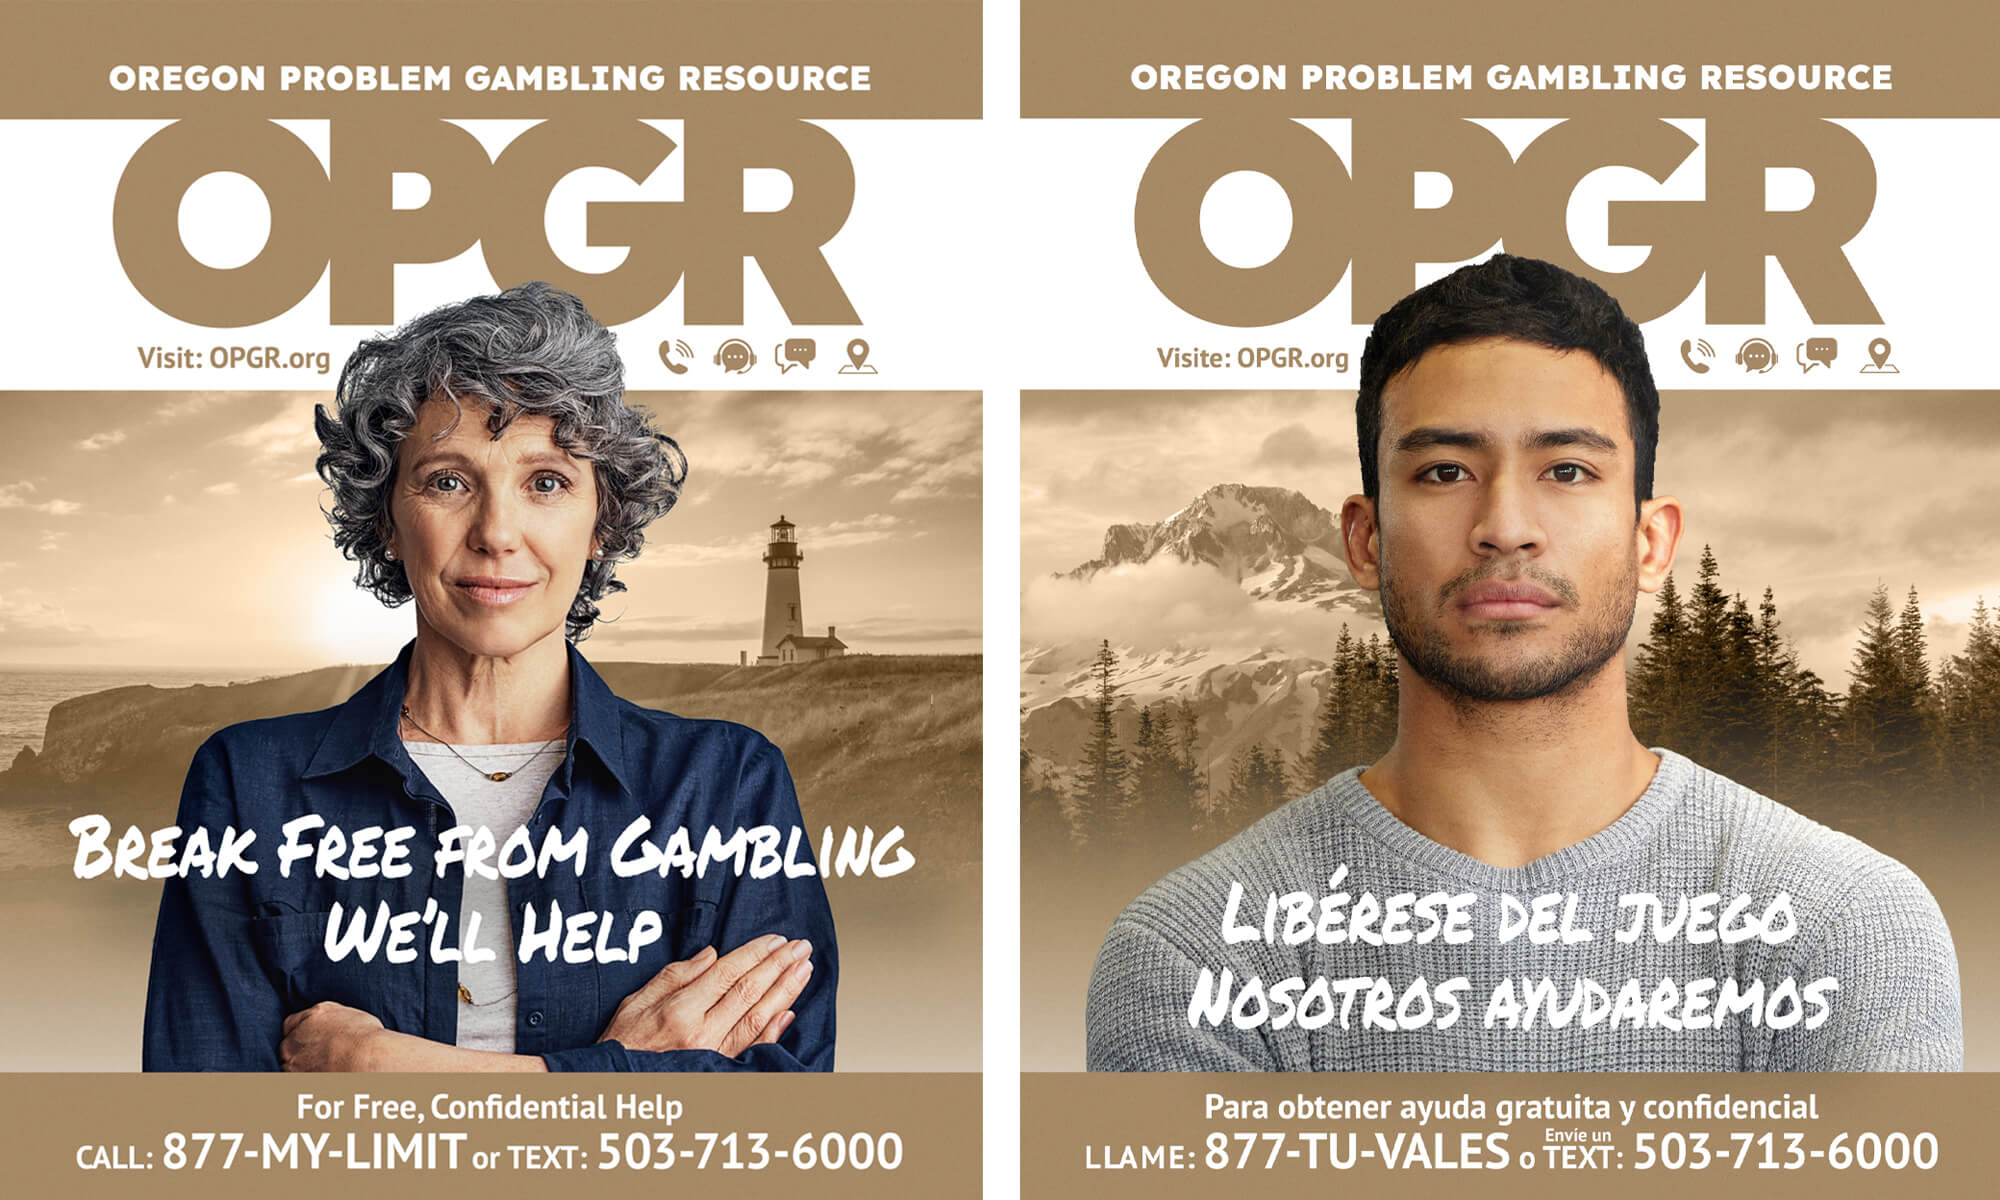 two OPGR print assets, one in English and one in Spanish. Both posters feature a person looking calmly at the viewer in front of a monochromatic Oregon landscape with OPGR in bold at the top of the image and the helpline phone number at the bottom